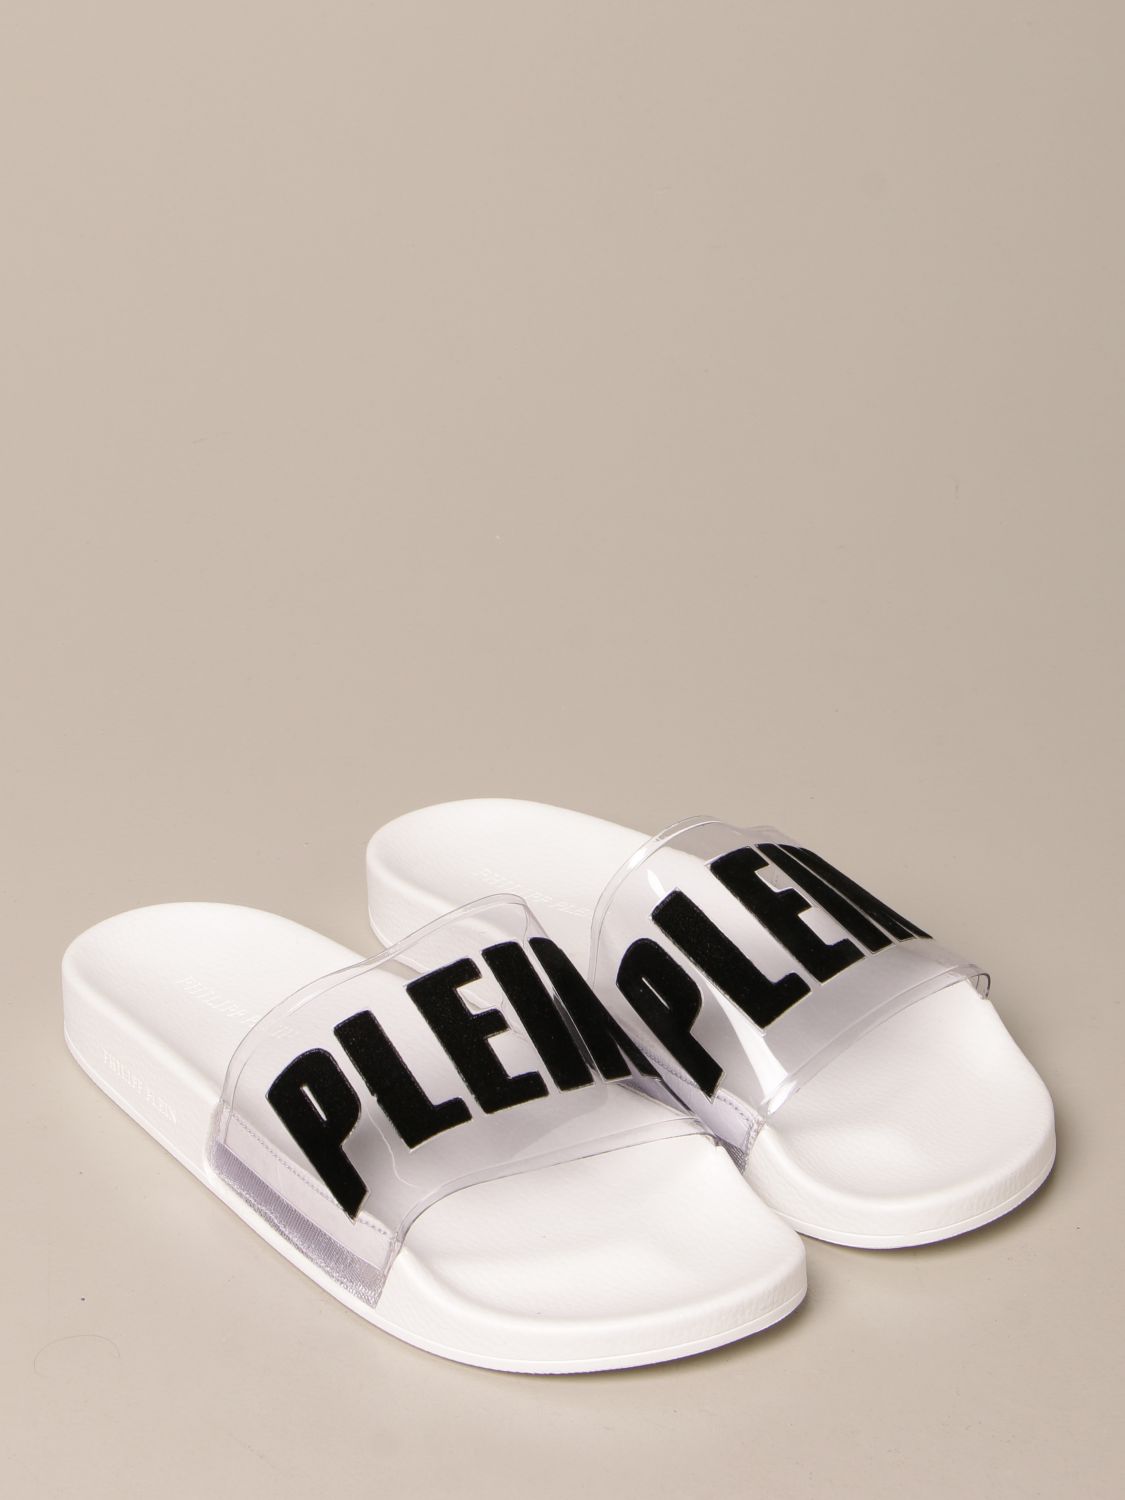 disinfect Steadily learn Philipp Plein Outlet: sandals for man - White | Philipp Plein sandals PAAS  MSG0045 PXV001N online on GIGLIO.COM